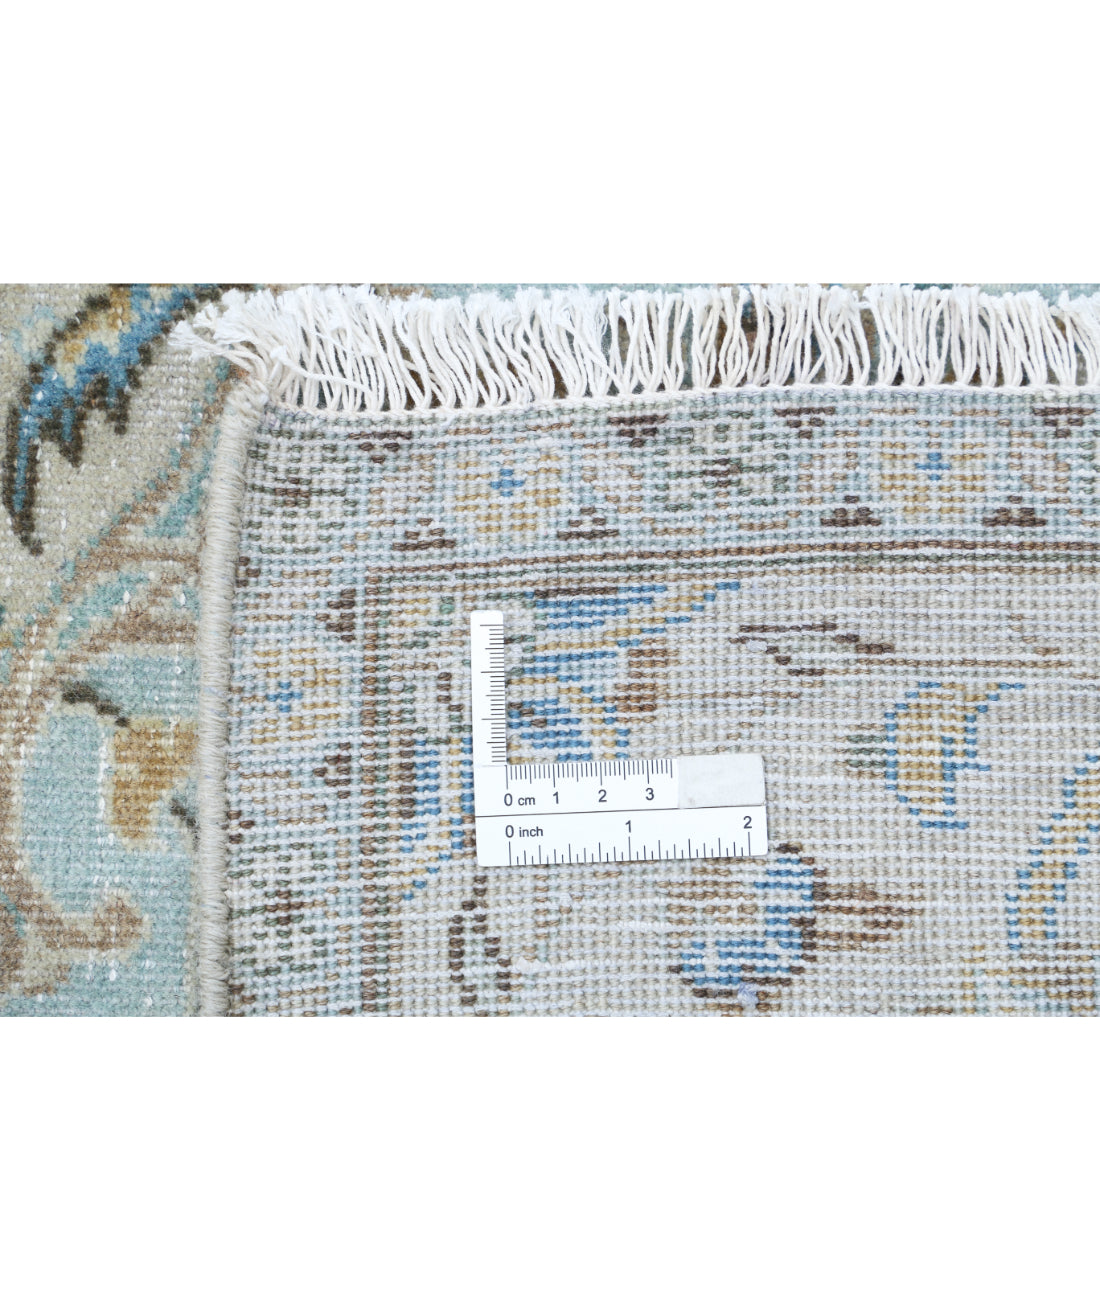 Hand Knotted Vintage Persian Kashan Wool Rug - 8'7'' x 12'7'' 8'7'' x 12'7'' (258 X 378) / Ivory / Blue